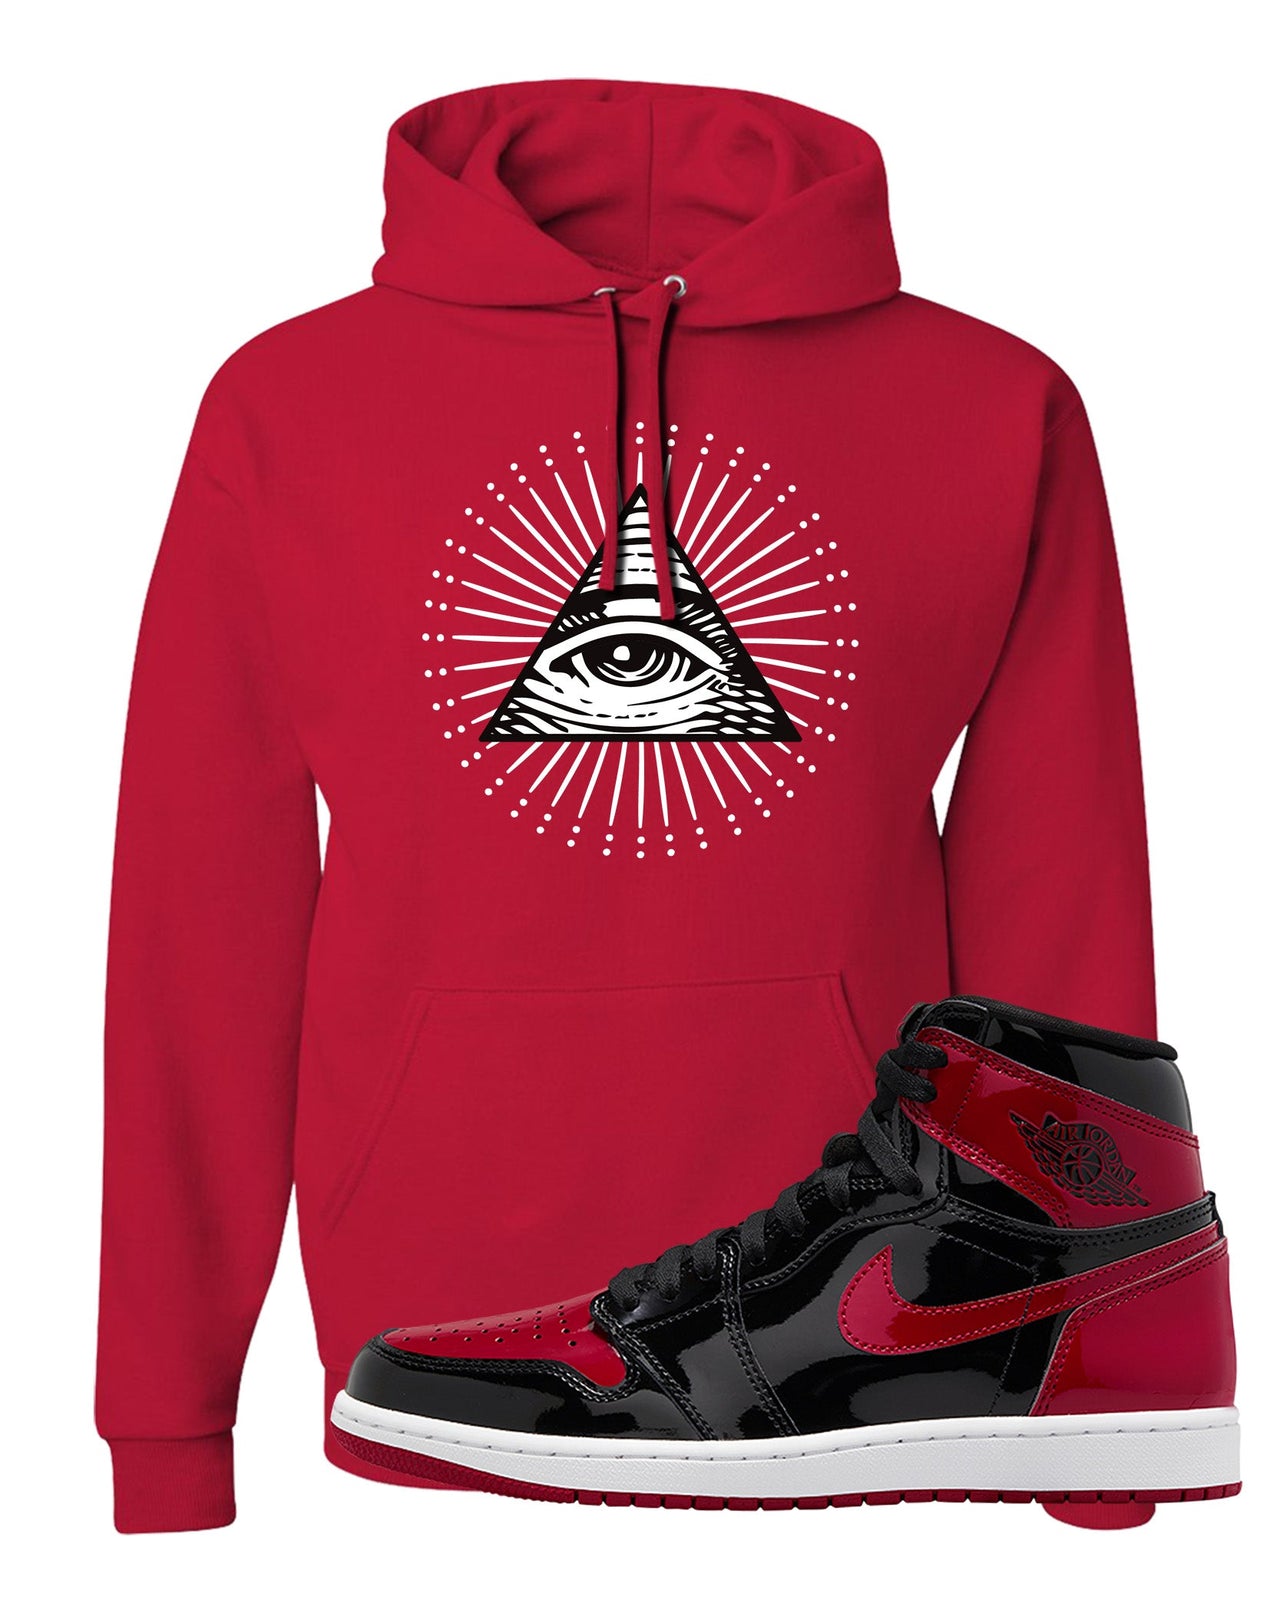 Patent Bred 1s Hoodie | All Seeing Eye, Red